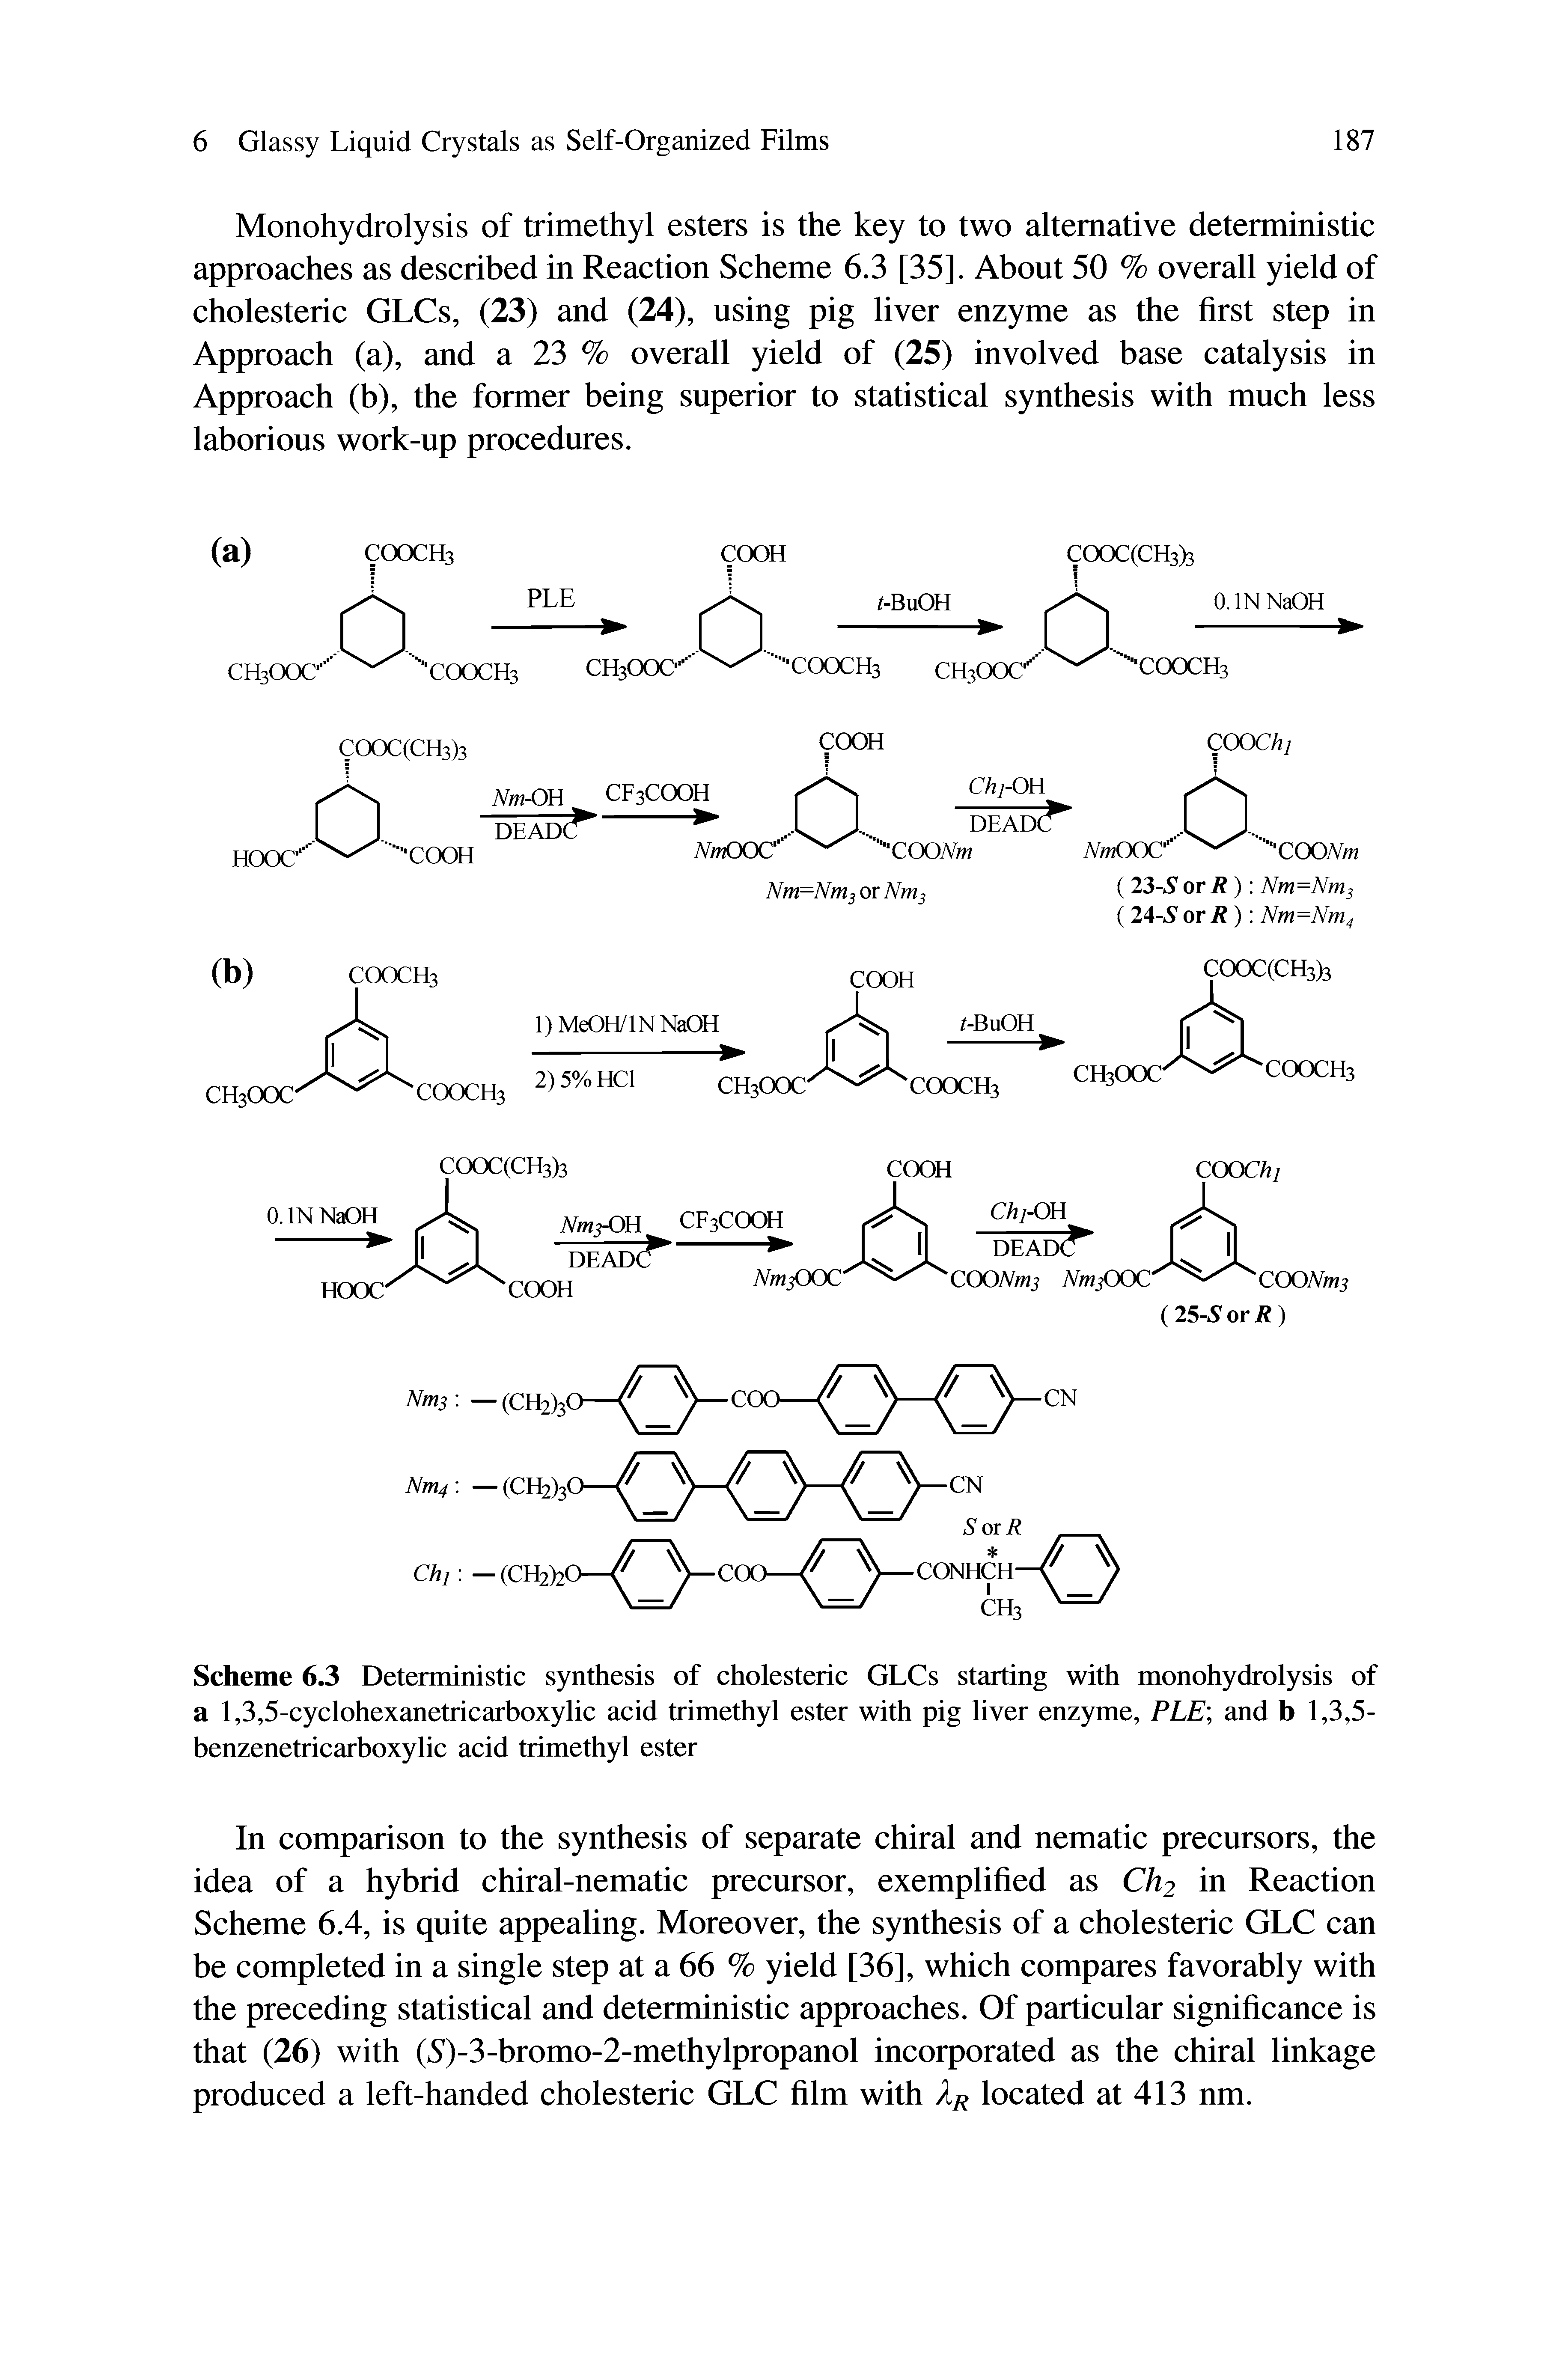 Scheme 6.3 Deterministic synthesis of cholesteric GLCs starting with monohydrolysis of a 1,3,5-cyclohexanetricarboxylic acid trimethyl ester with pig liver enzyme, PLE and b 1,3,5-benzenetricarboxylic acid trimethyl ester...